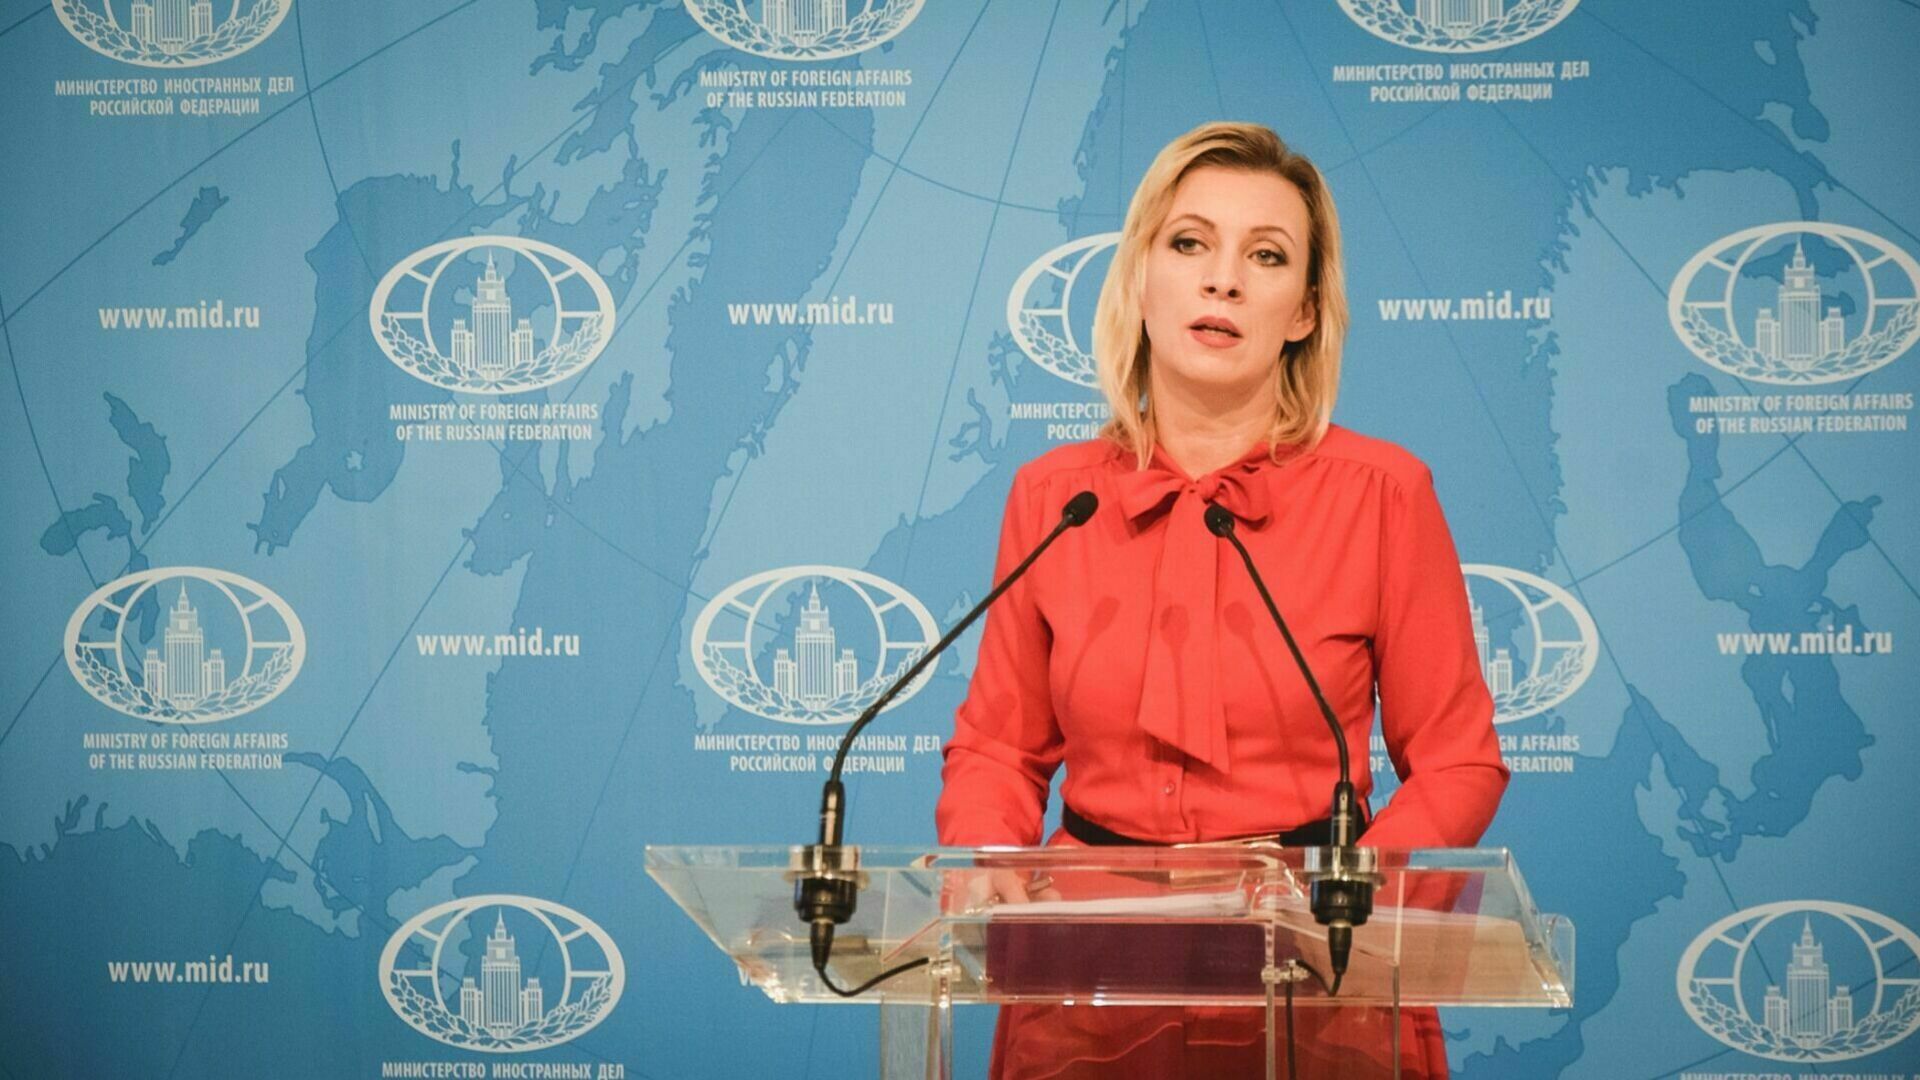 Maria Zakharova reported on the upcoming retaliatory sanctions against the United States and Canada